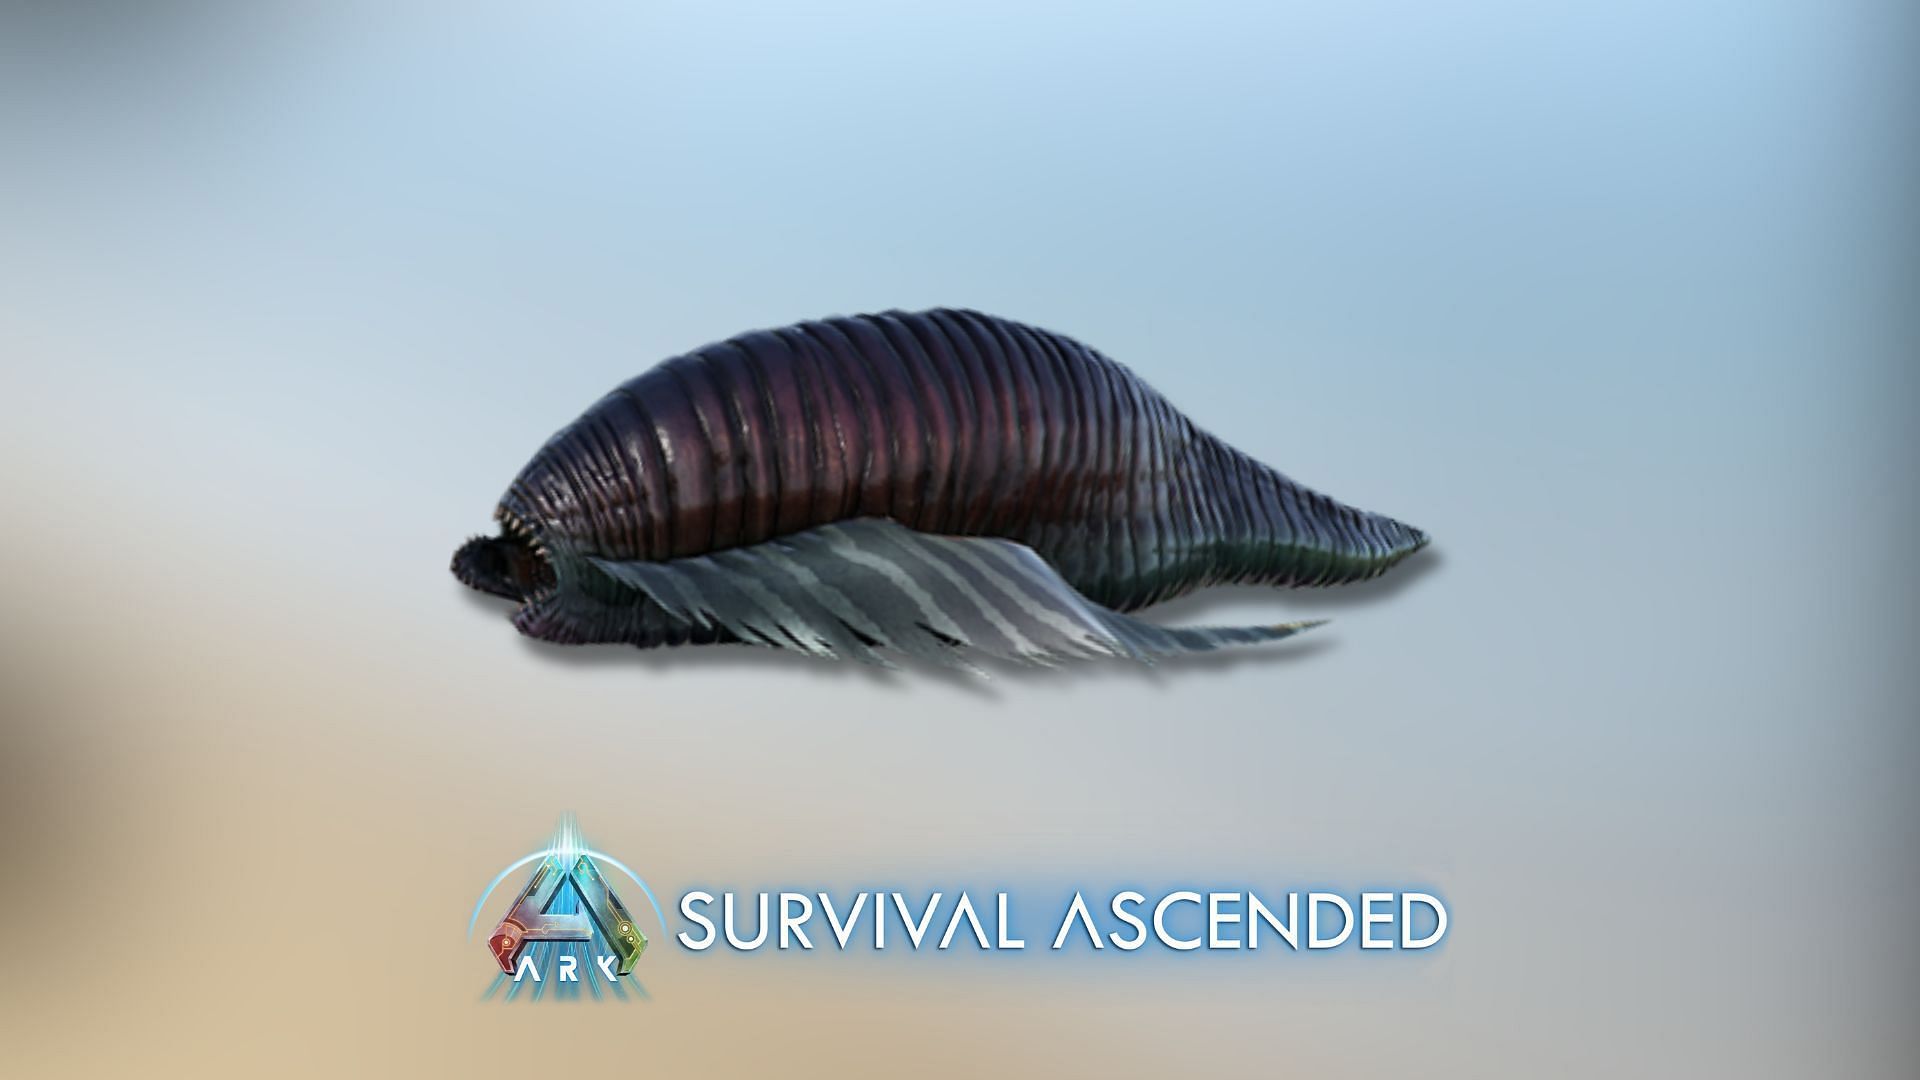 Players can get rid of Swamp Fever using Lesser Antidote (Image via Studio Wildcard)